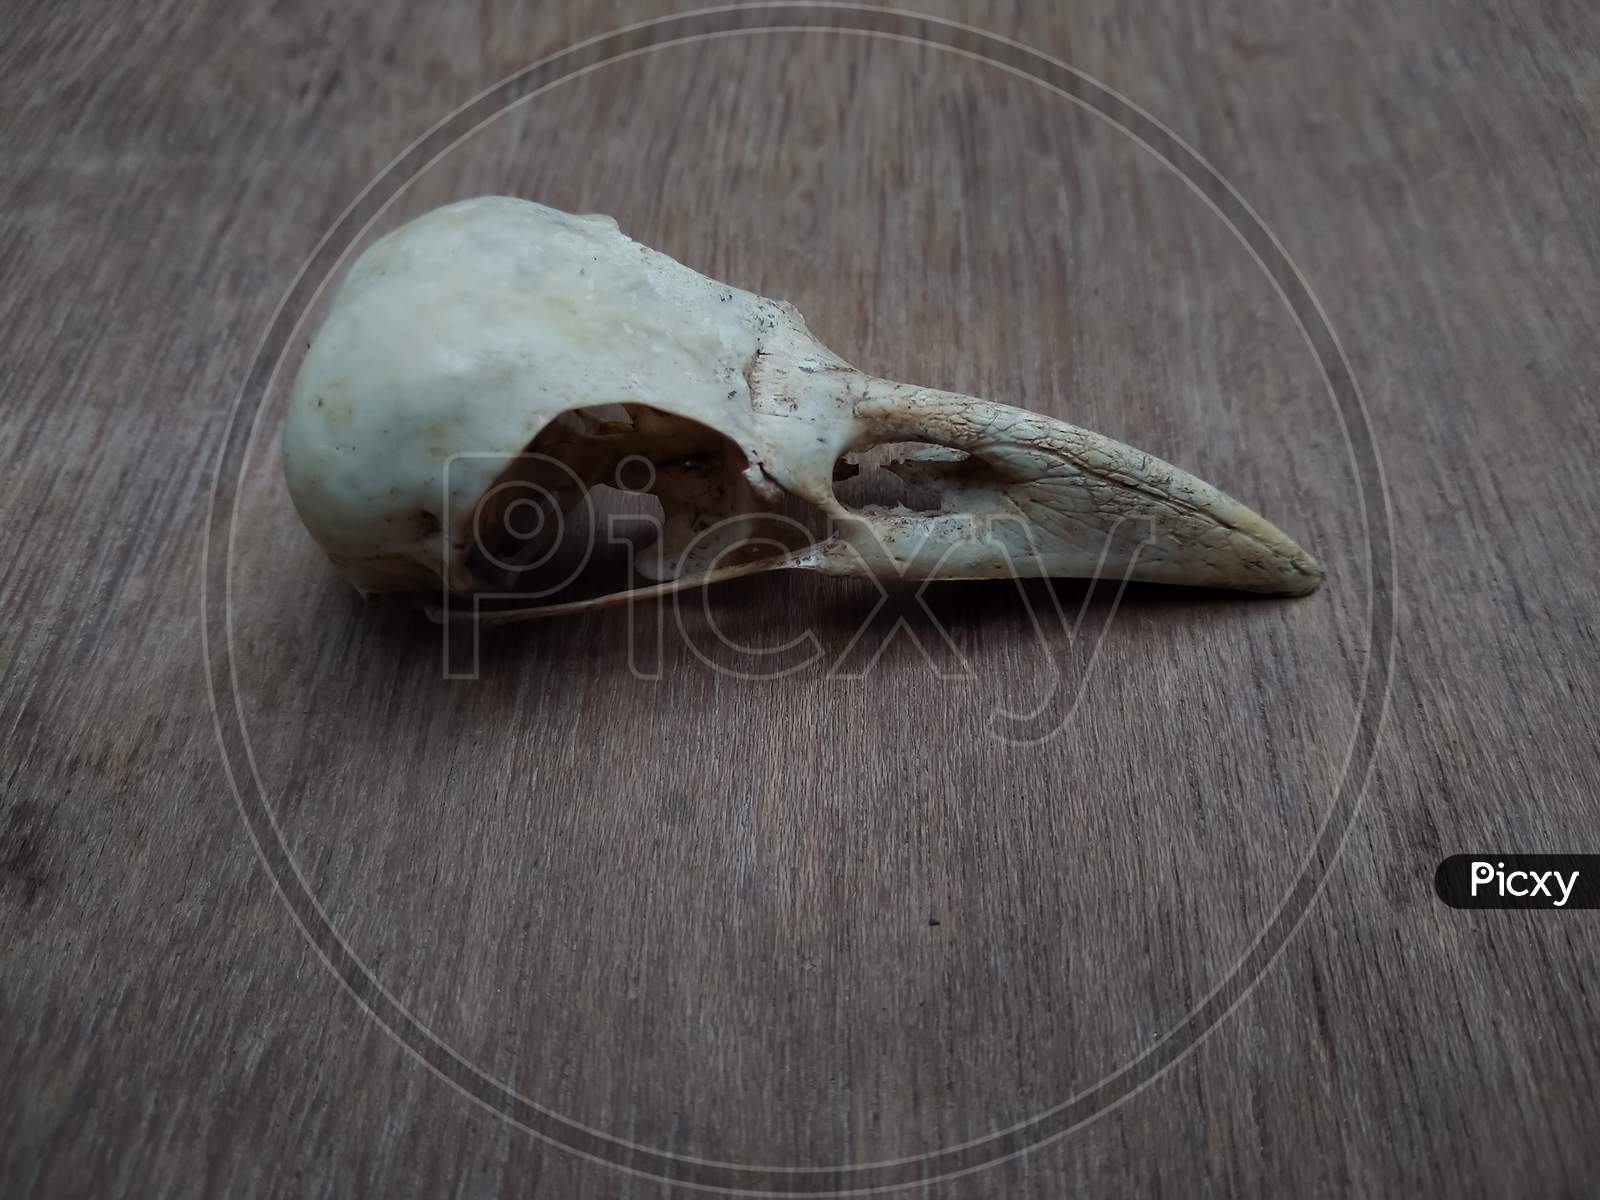 Raven skull on a wooden table